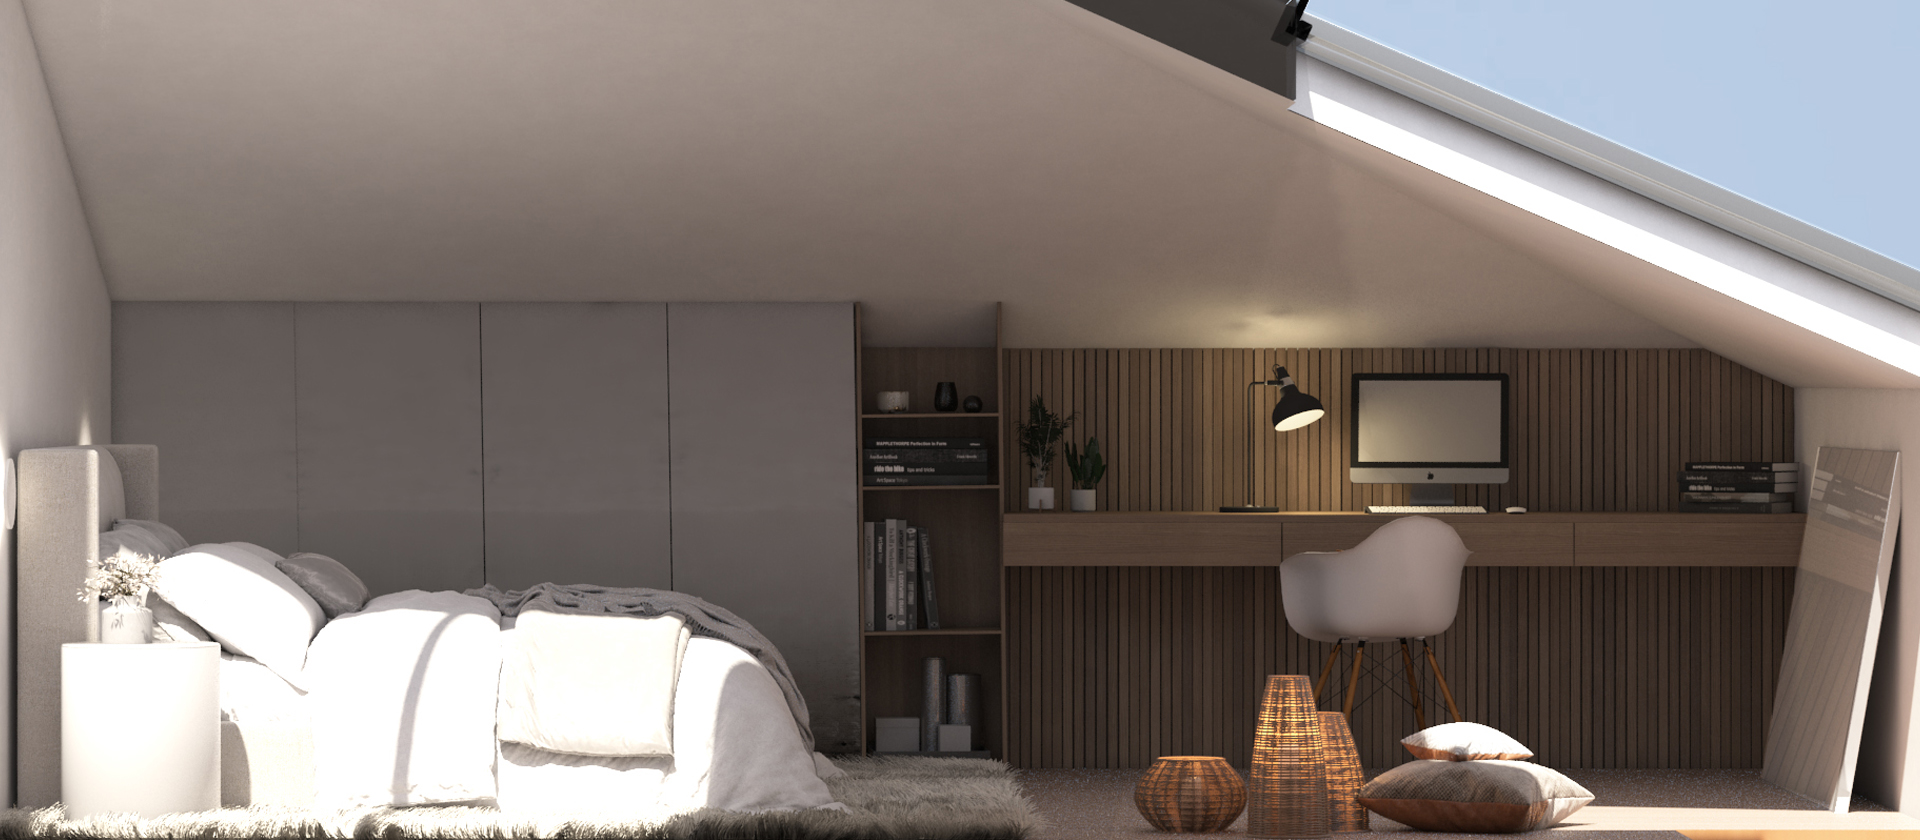 patio house bedroom side view render arta greece the hive architects